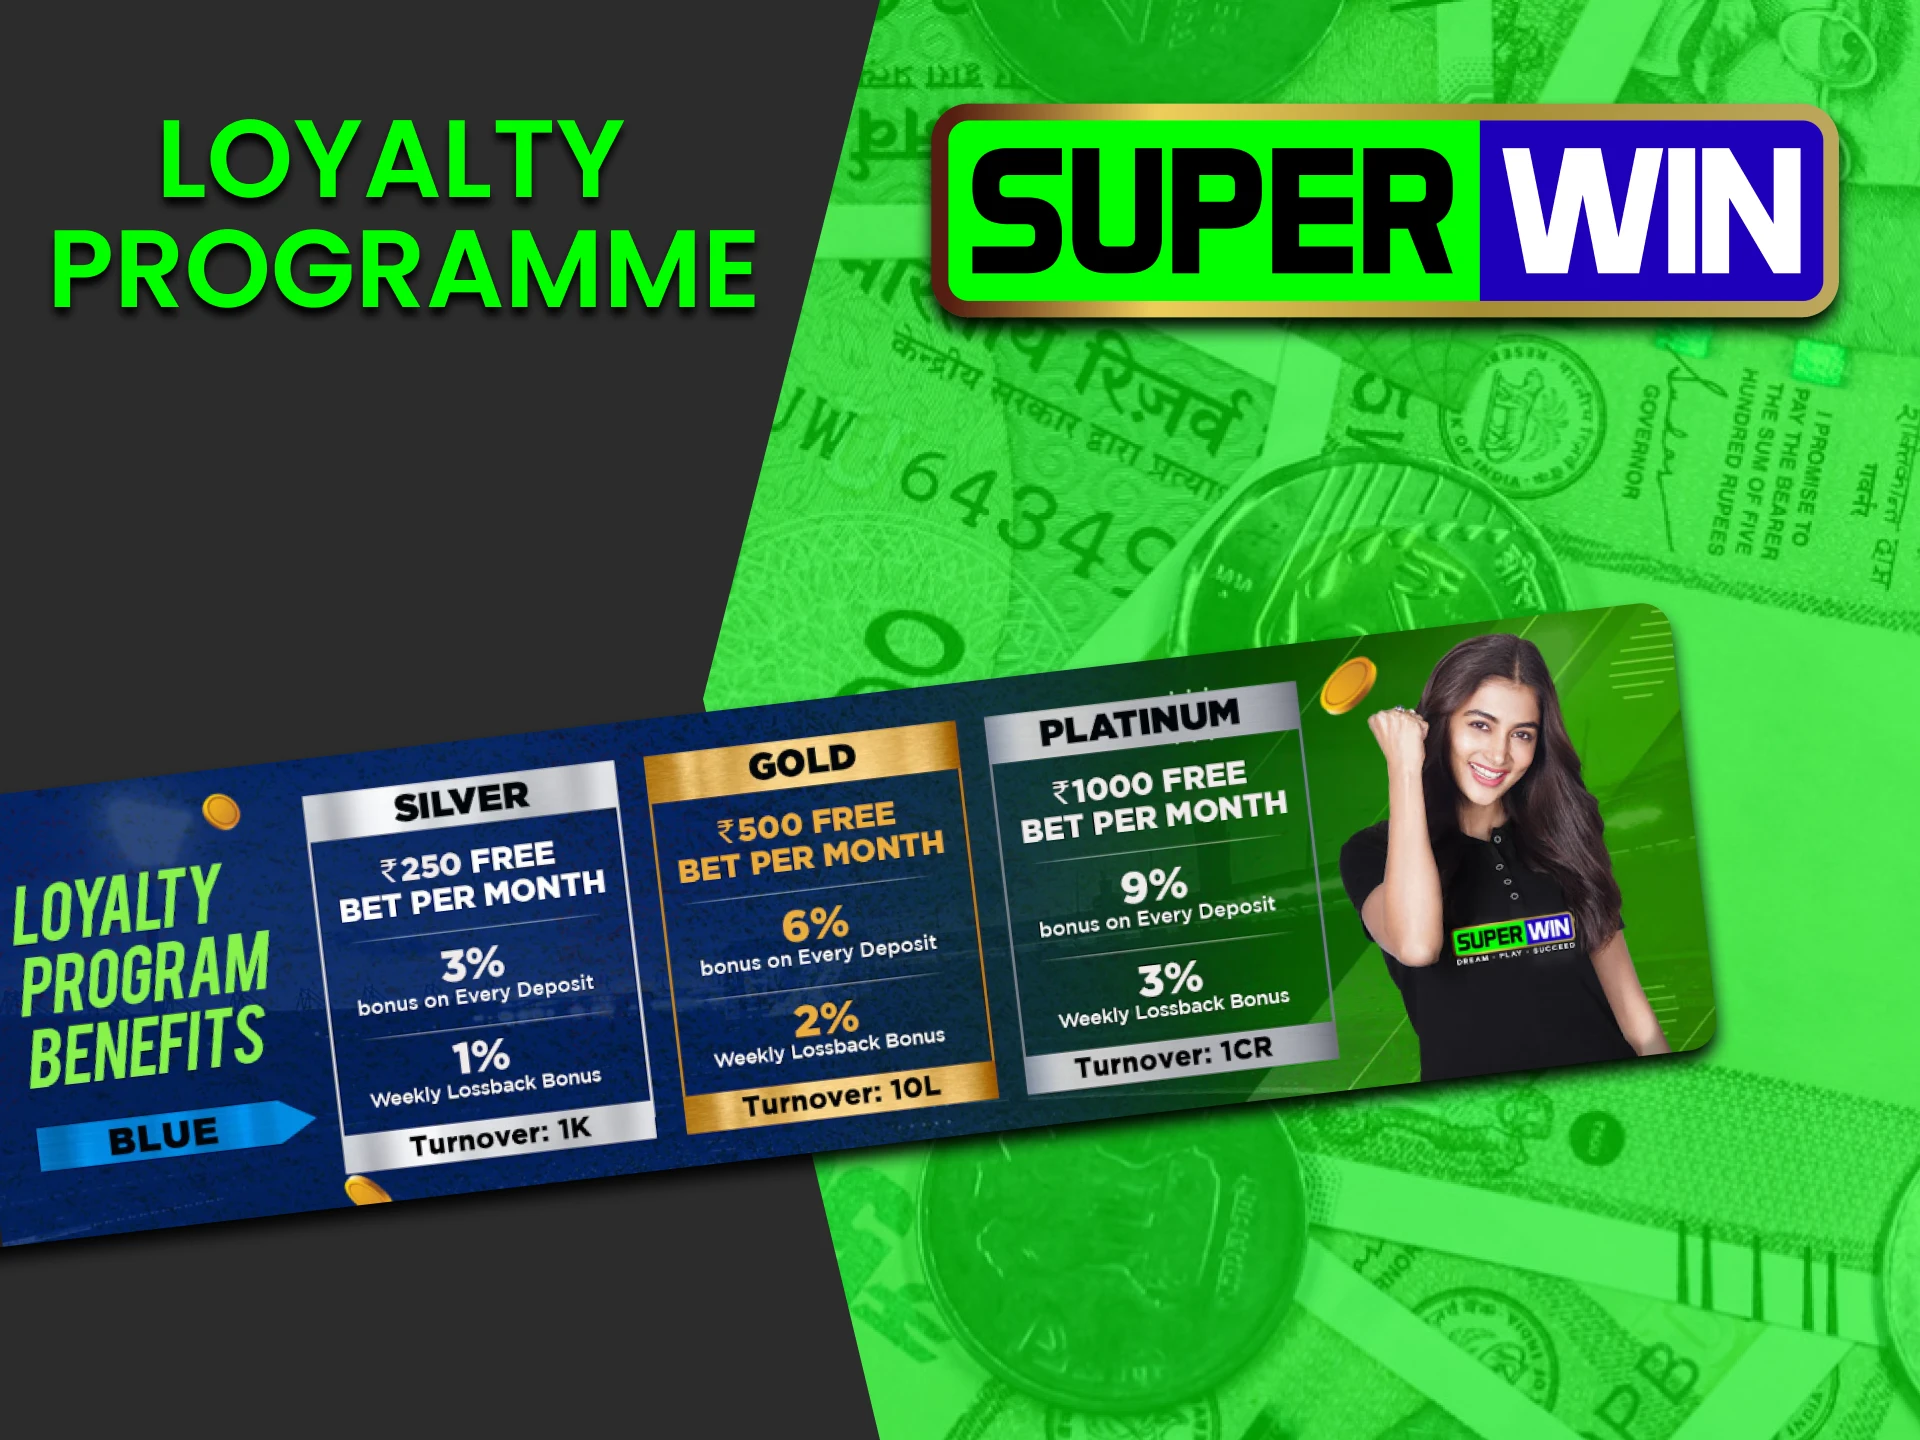 Find out about the bonus program from Superwin.